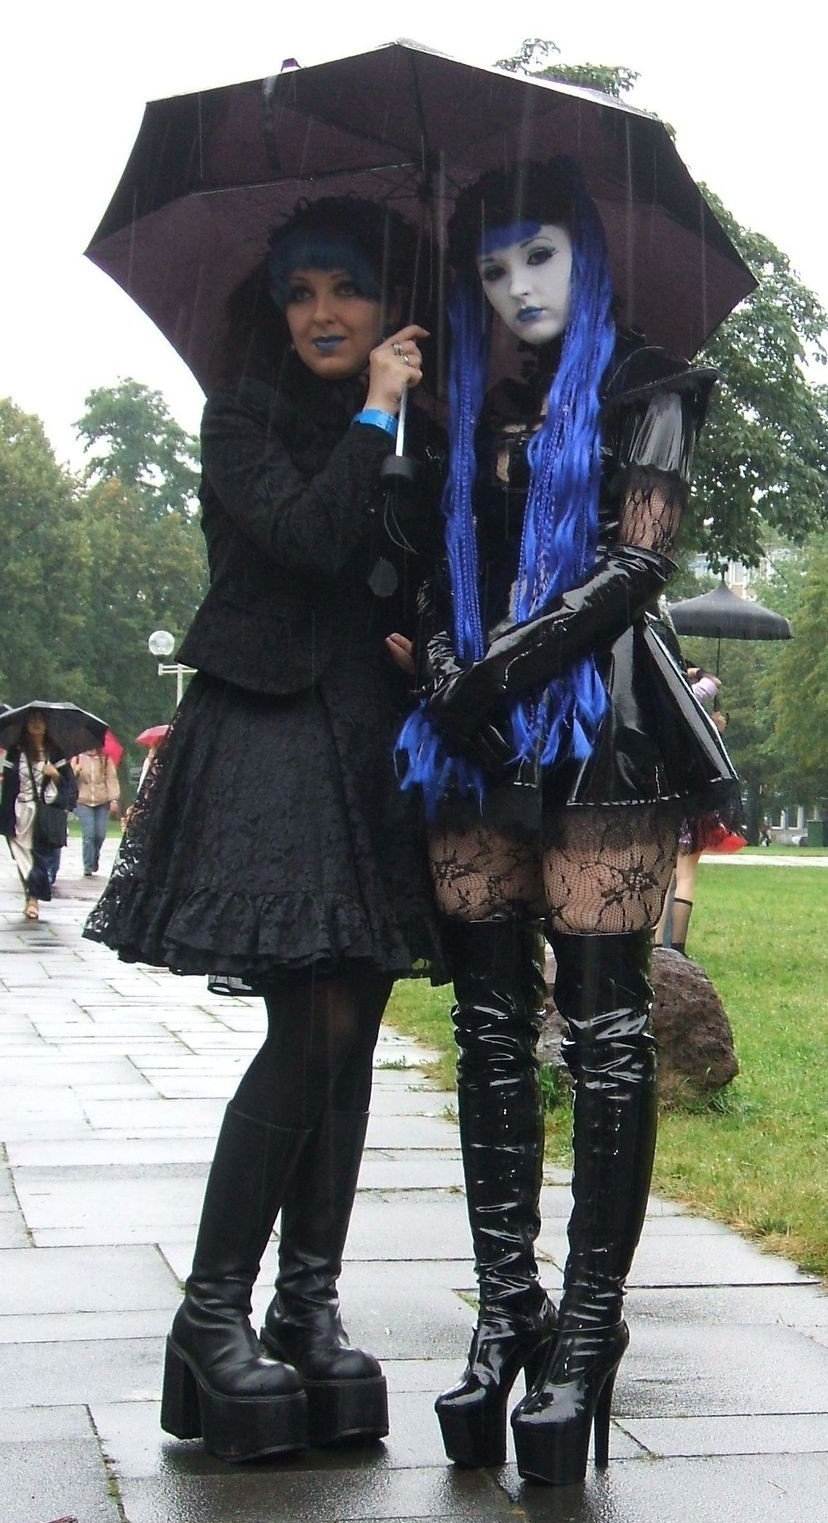 Two Gothic Girls wearing Black Opaque and Black Sheer Lace Pantyhose and Black Dresses